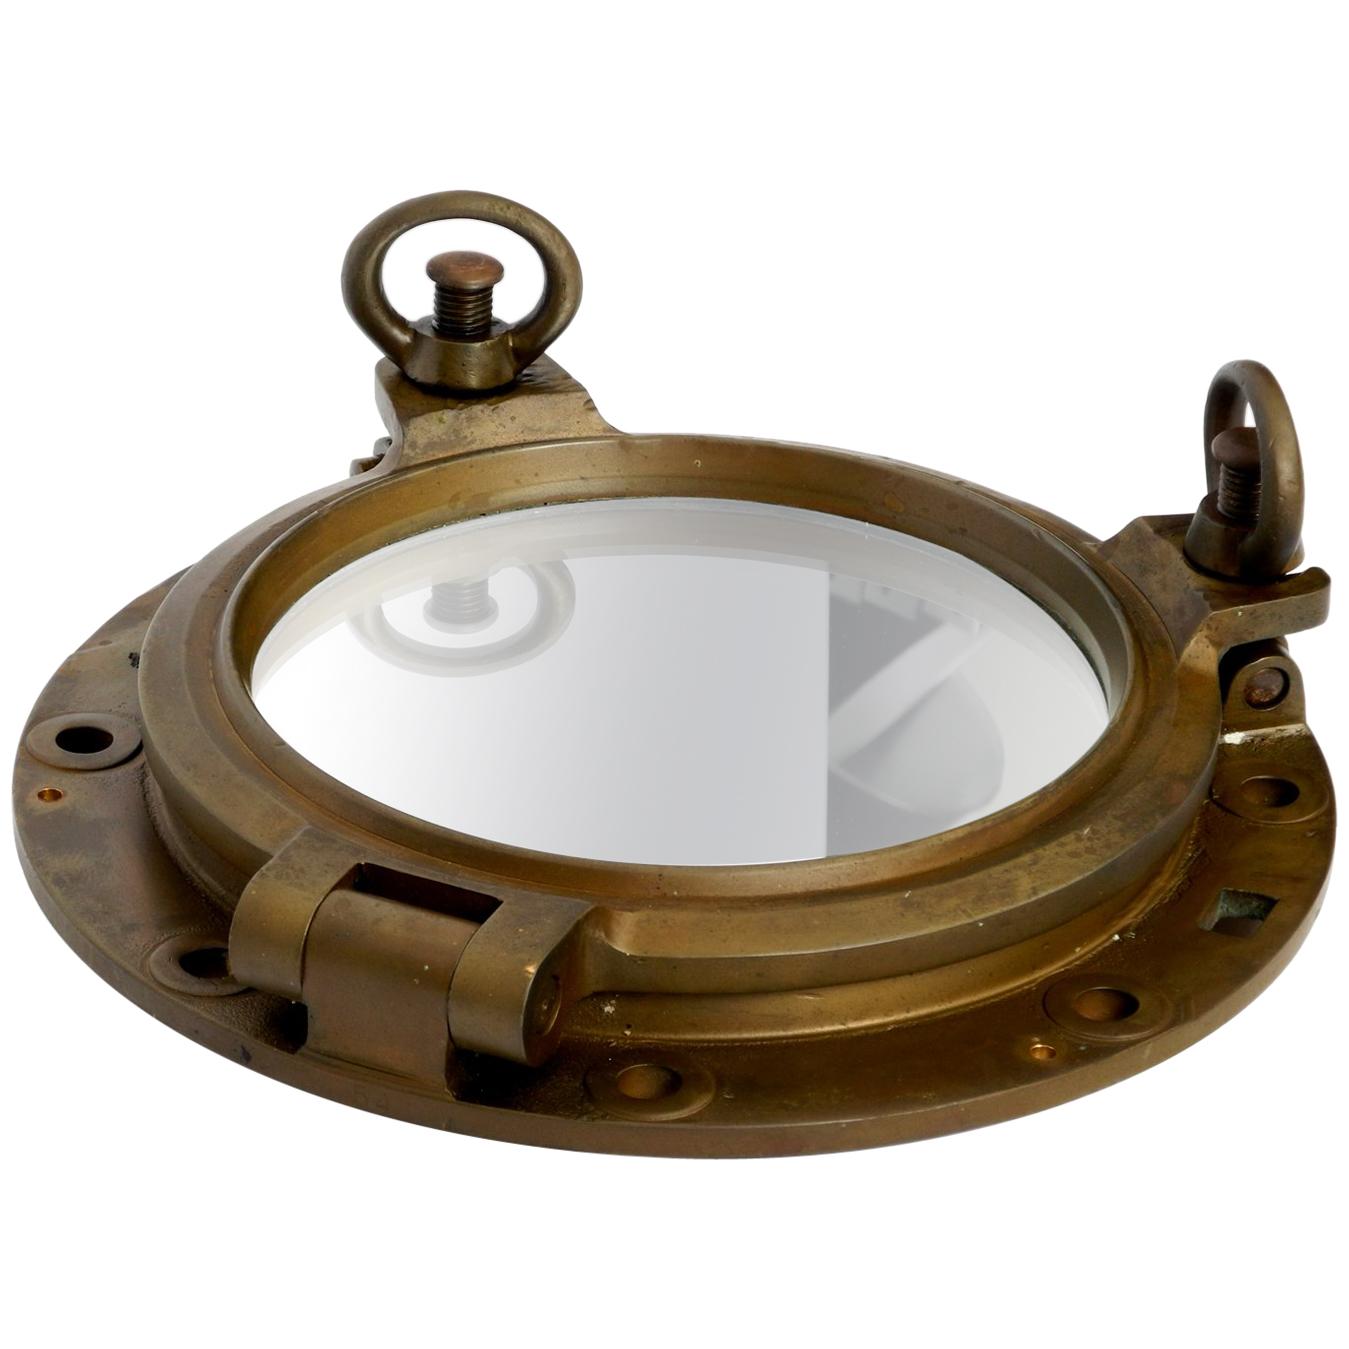 Genuine Old Brass Ship's Porthole Wall Mirror Heavy and Solid Construction